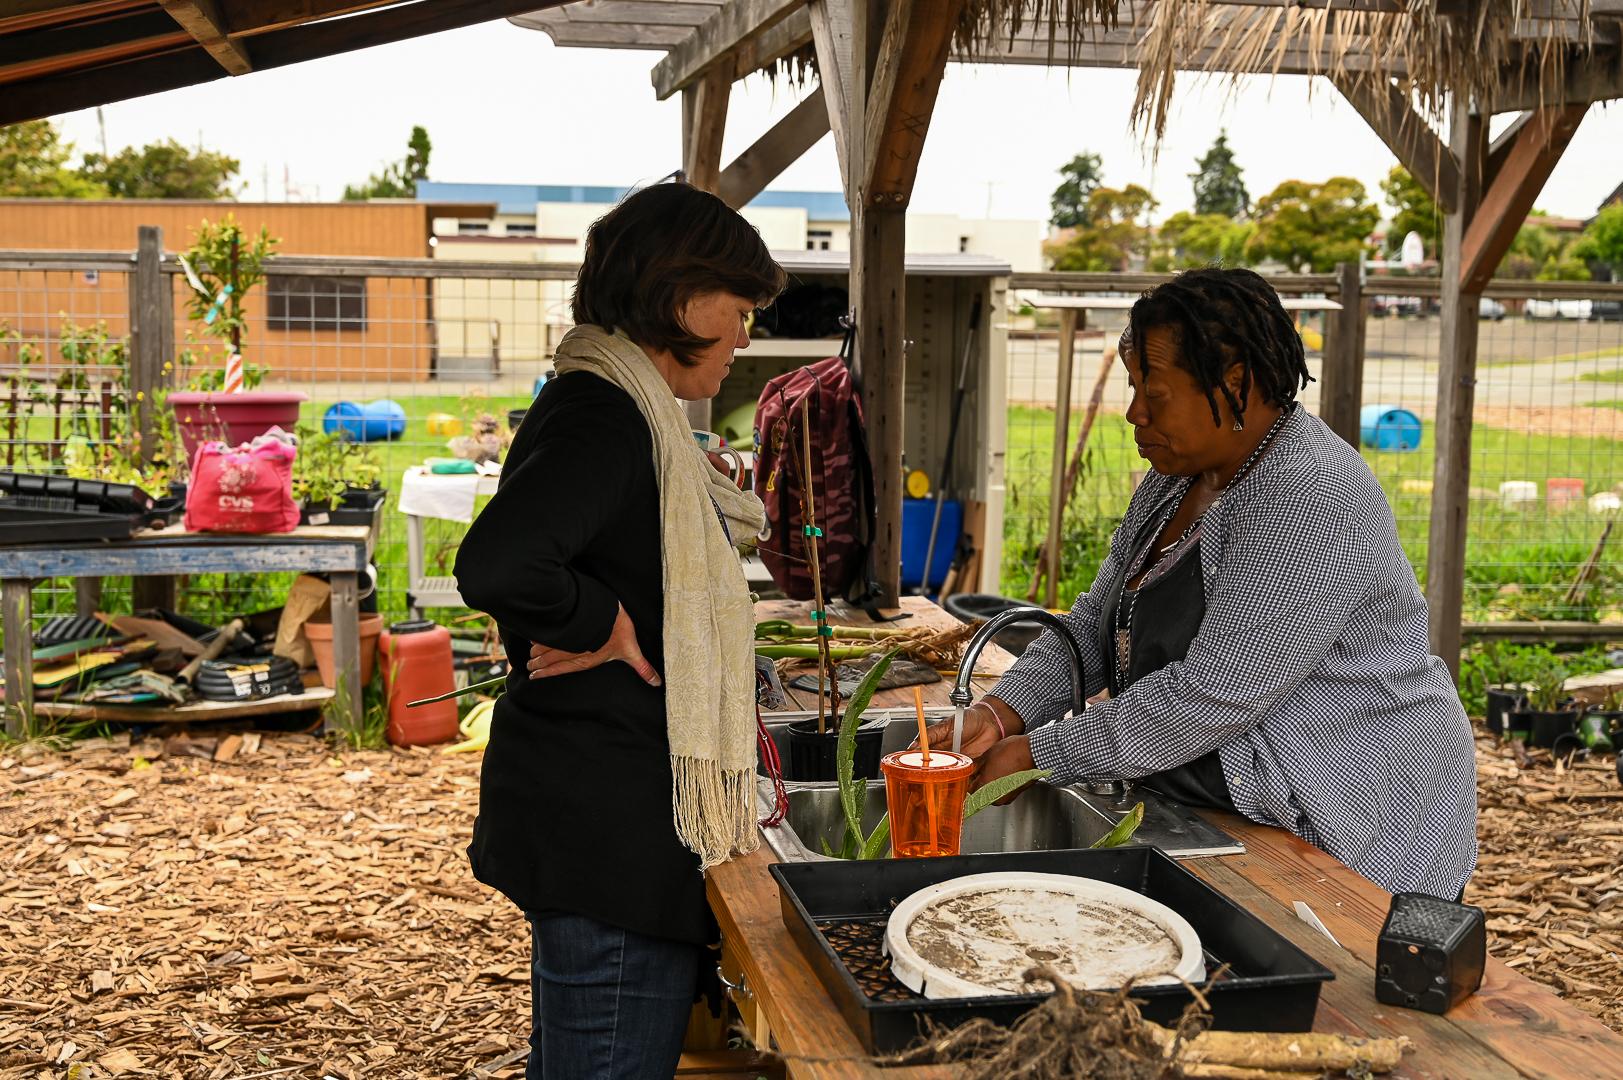 Wanda Stewart is a Trusted Leader in East Bay's Food Justice Movement.